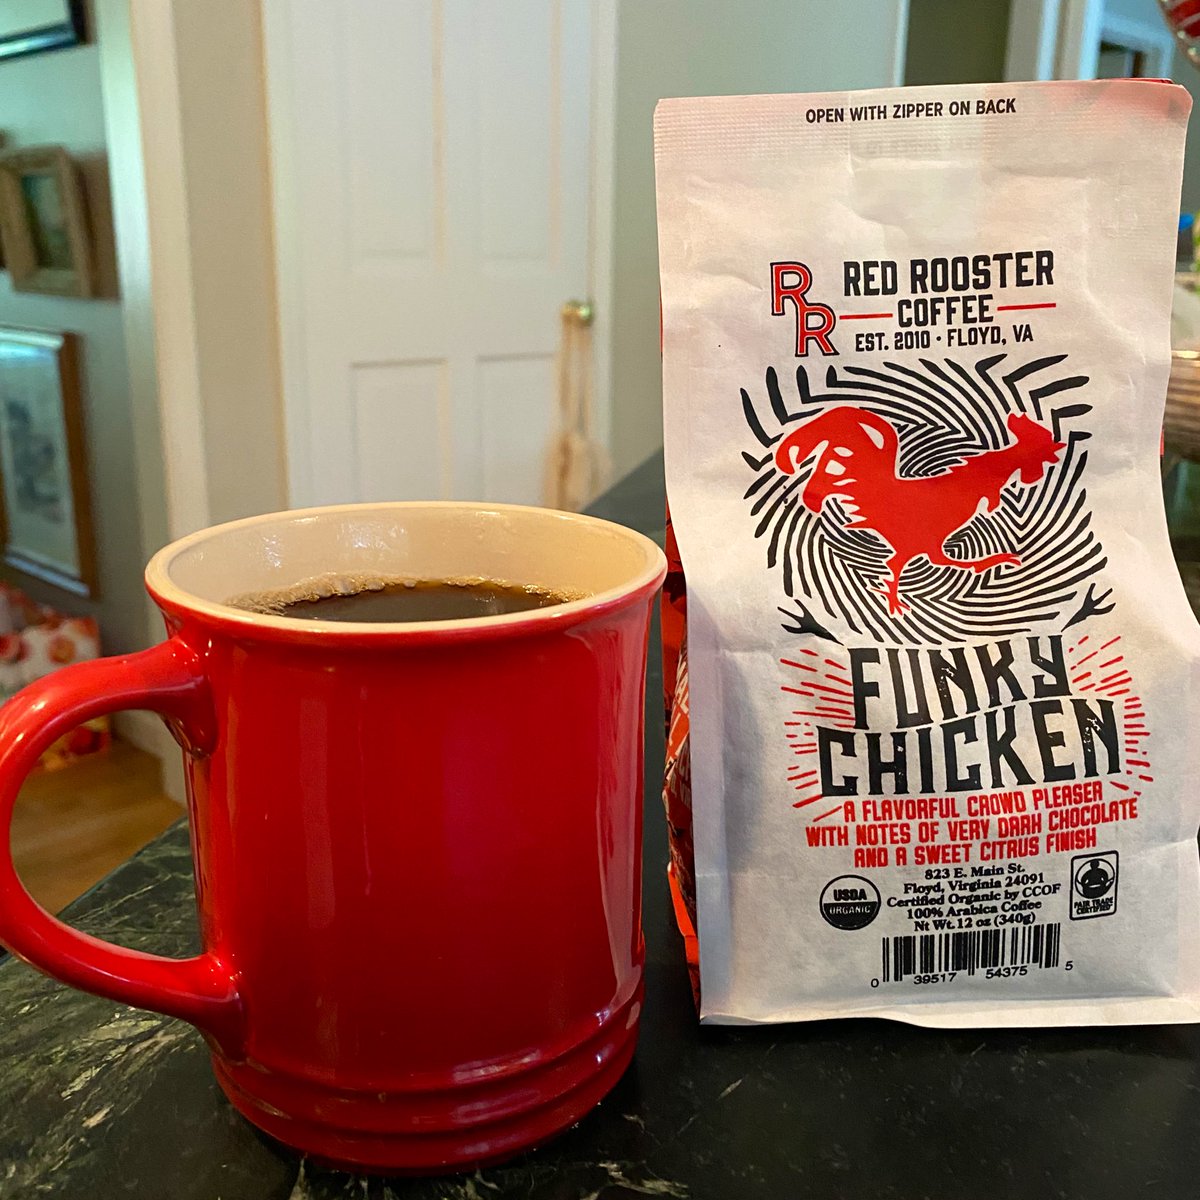 Red Rooster Coffee Funky ChickenThis one is excellent brewed hot and also wonderful as cold brew. The chocolate notes are great but don’t overpower, and it’s a really delightful cup. Could easily become my regular home brew.